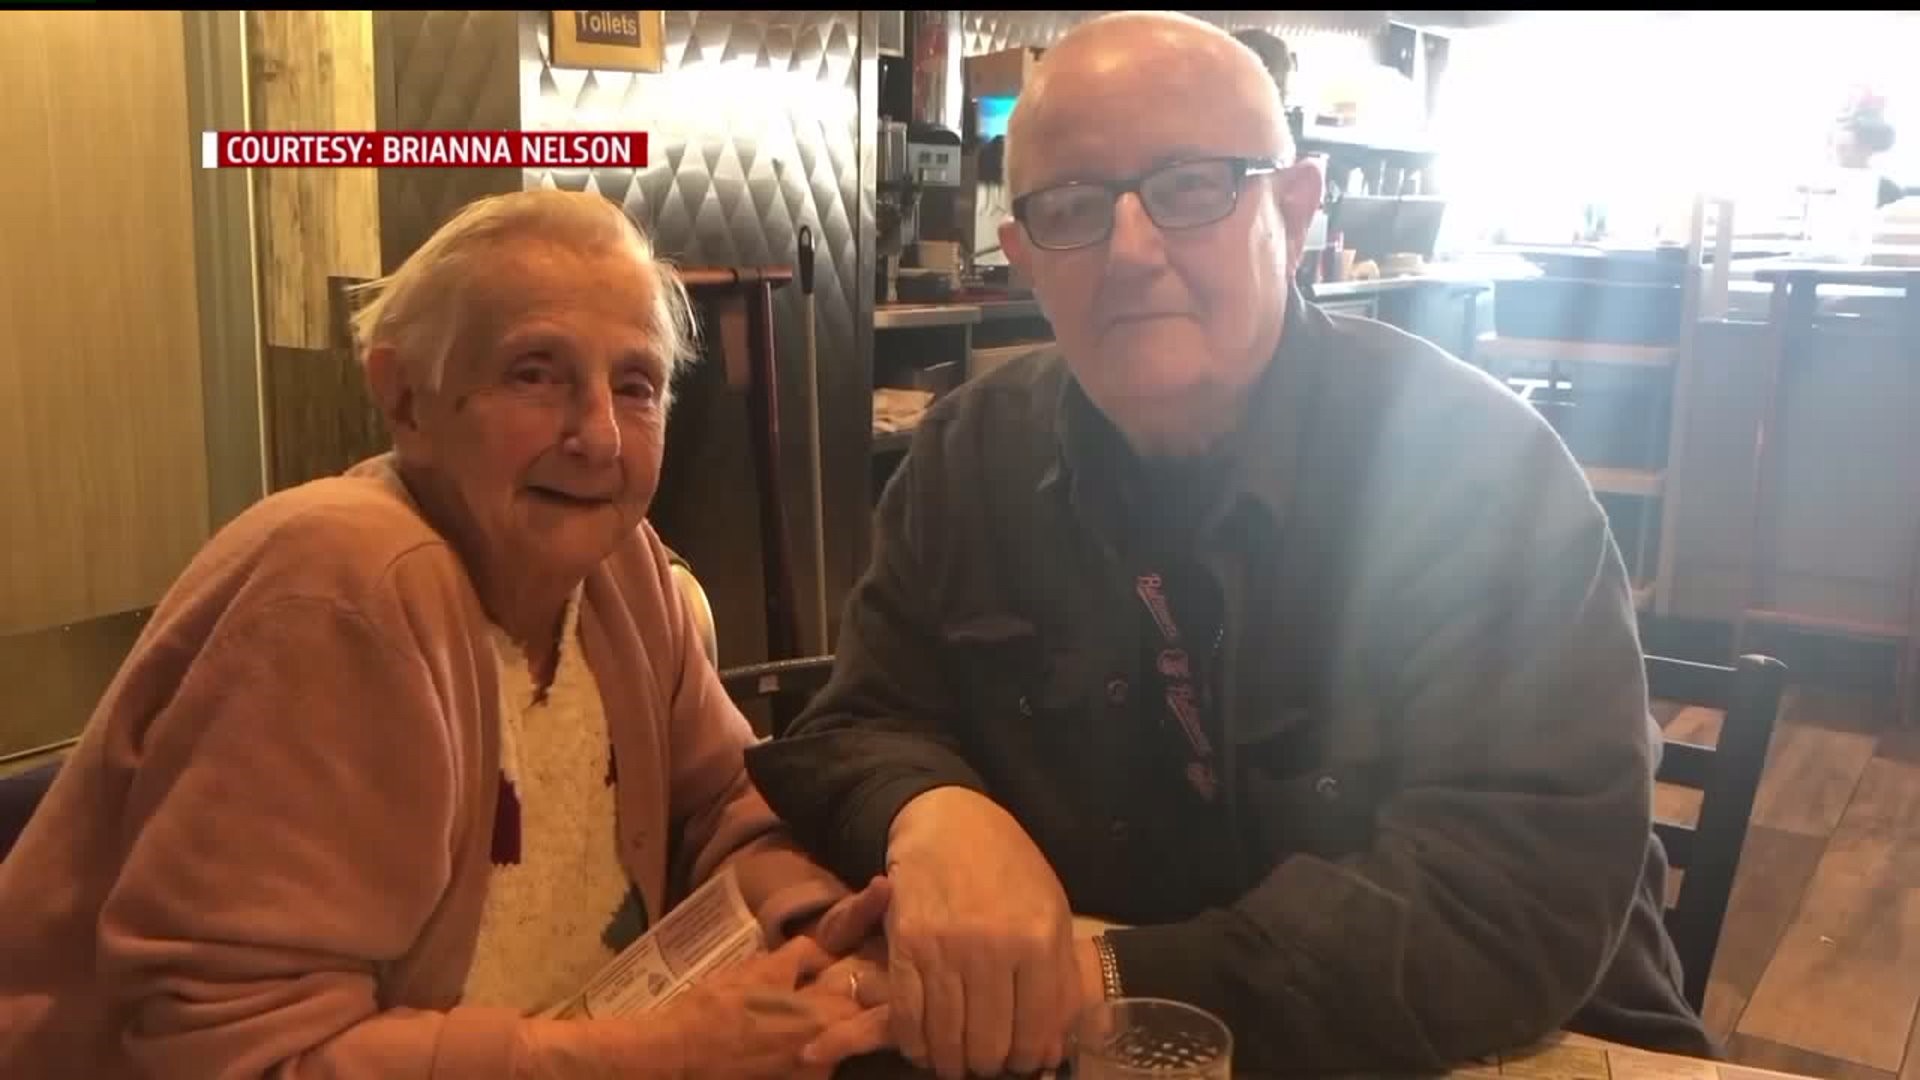 Woman meets brother who was put up for adoption nearly 80 years ago